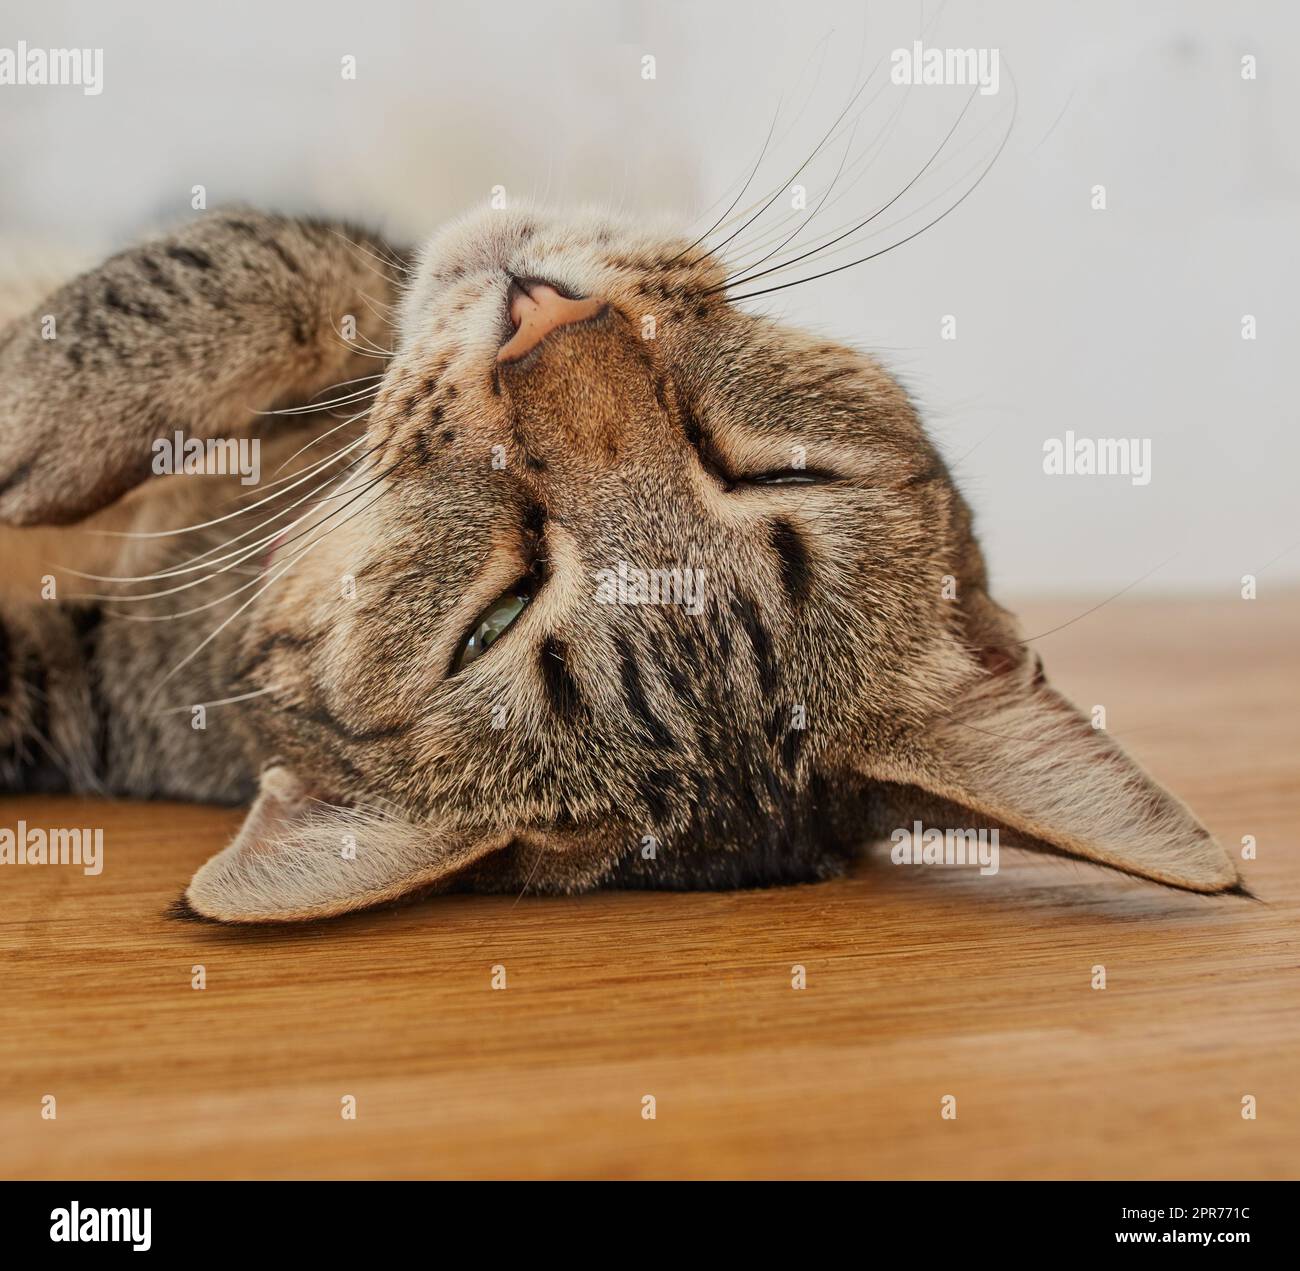 Closeup of a sleepy cat taking a nap. Face of a cute kitten falling asleep during the day. Tired and lazy domestic kitty relaxing upside down. Adorable cuddly pet with soft fur resting indoors Stock Photo